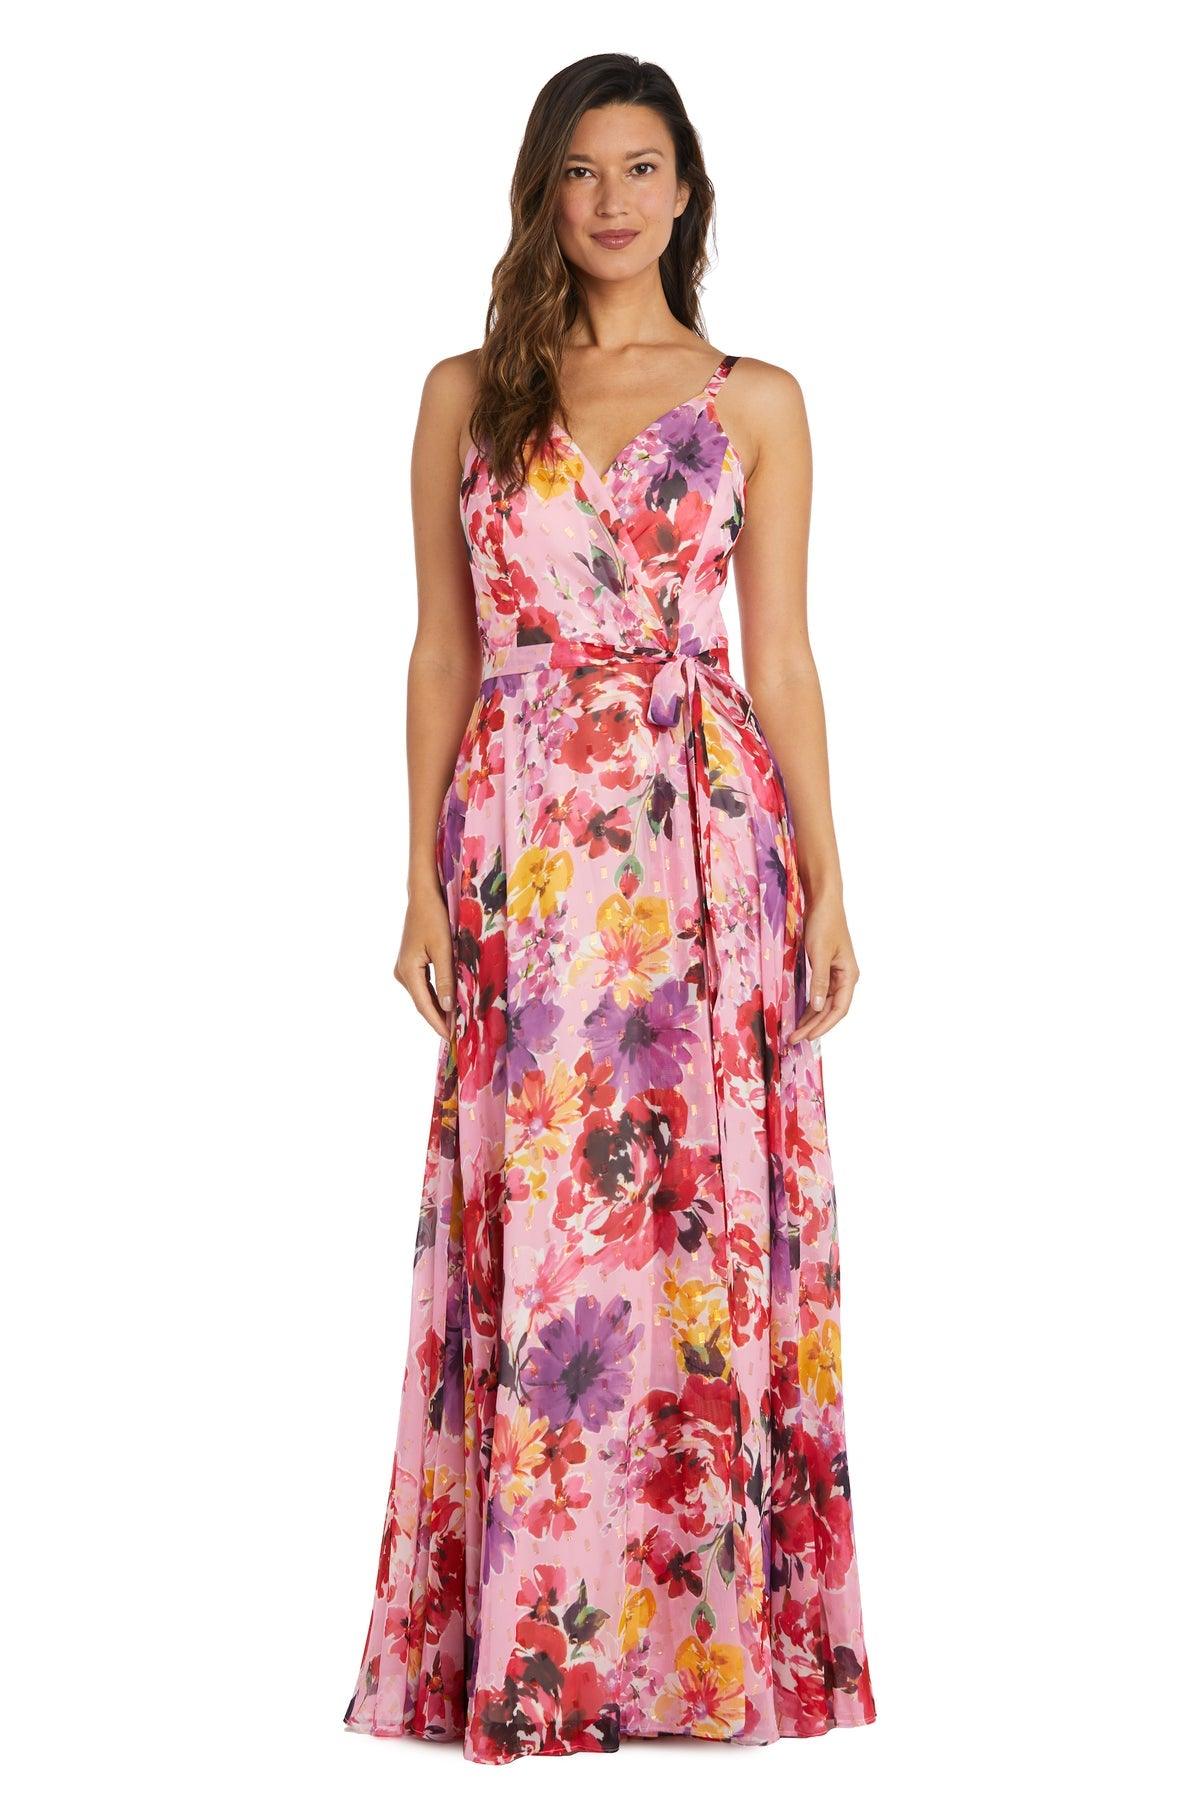 Nightway Long Formal Floral Print Dress 22164 - The Dress Outlet